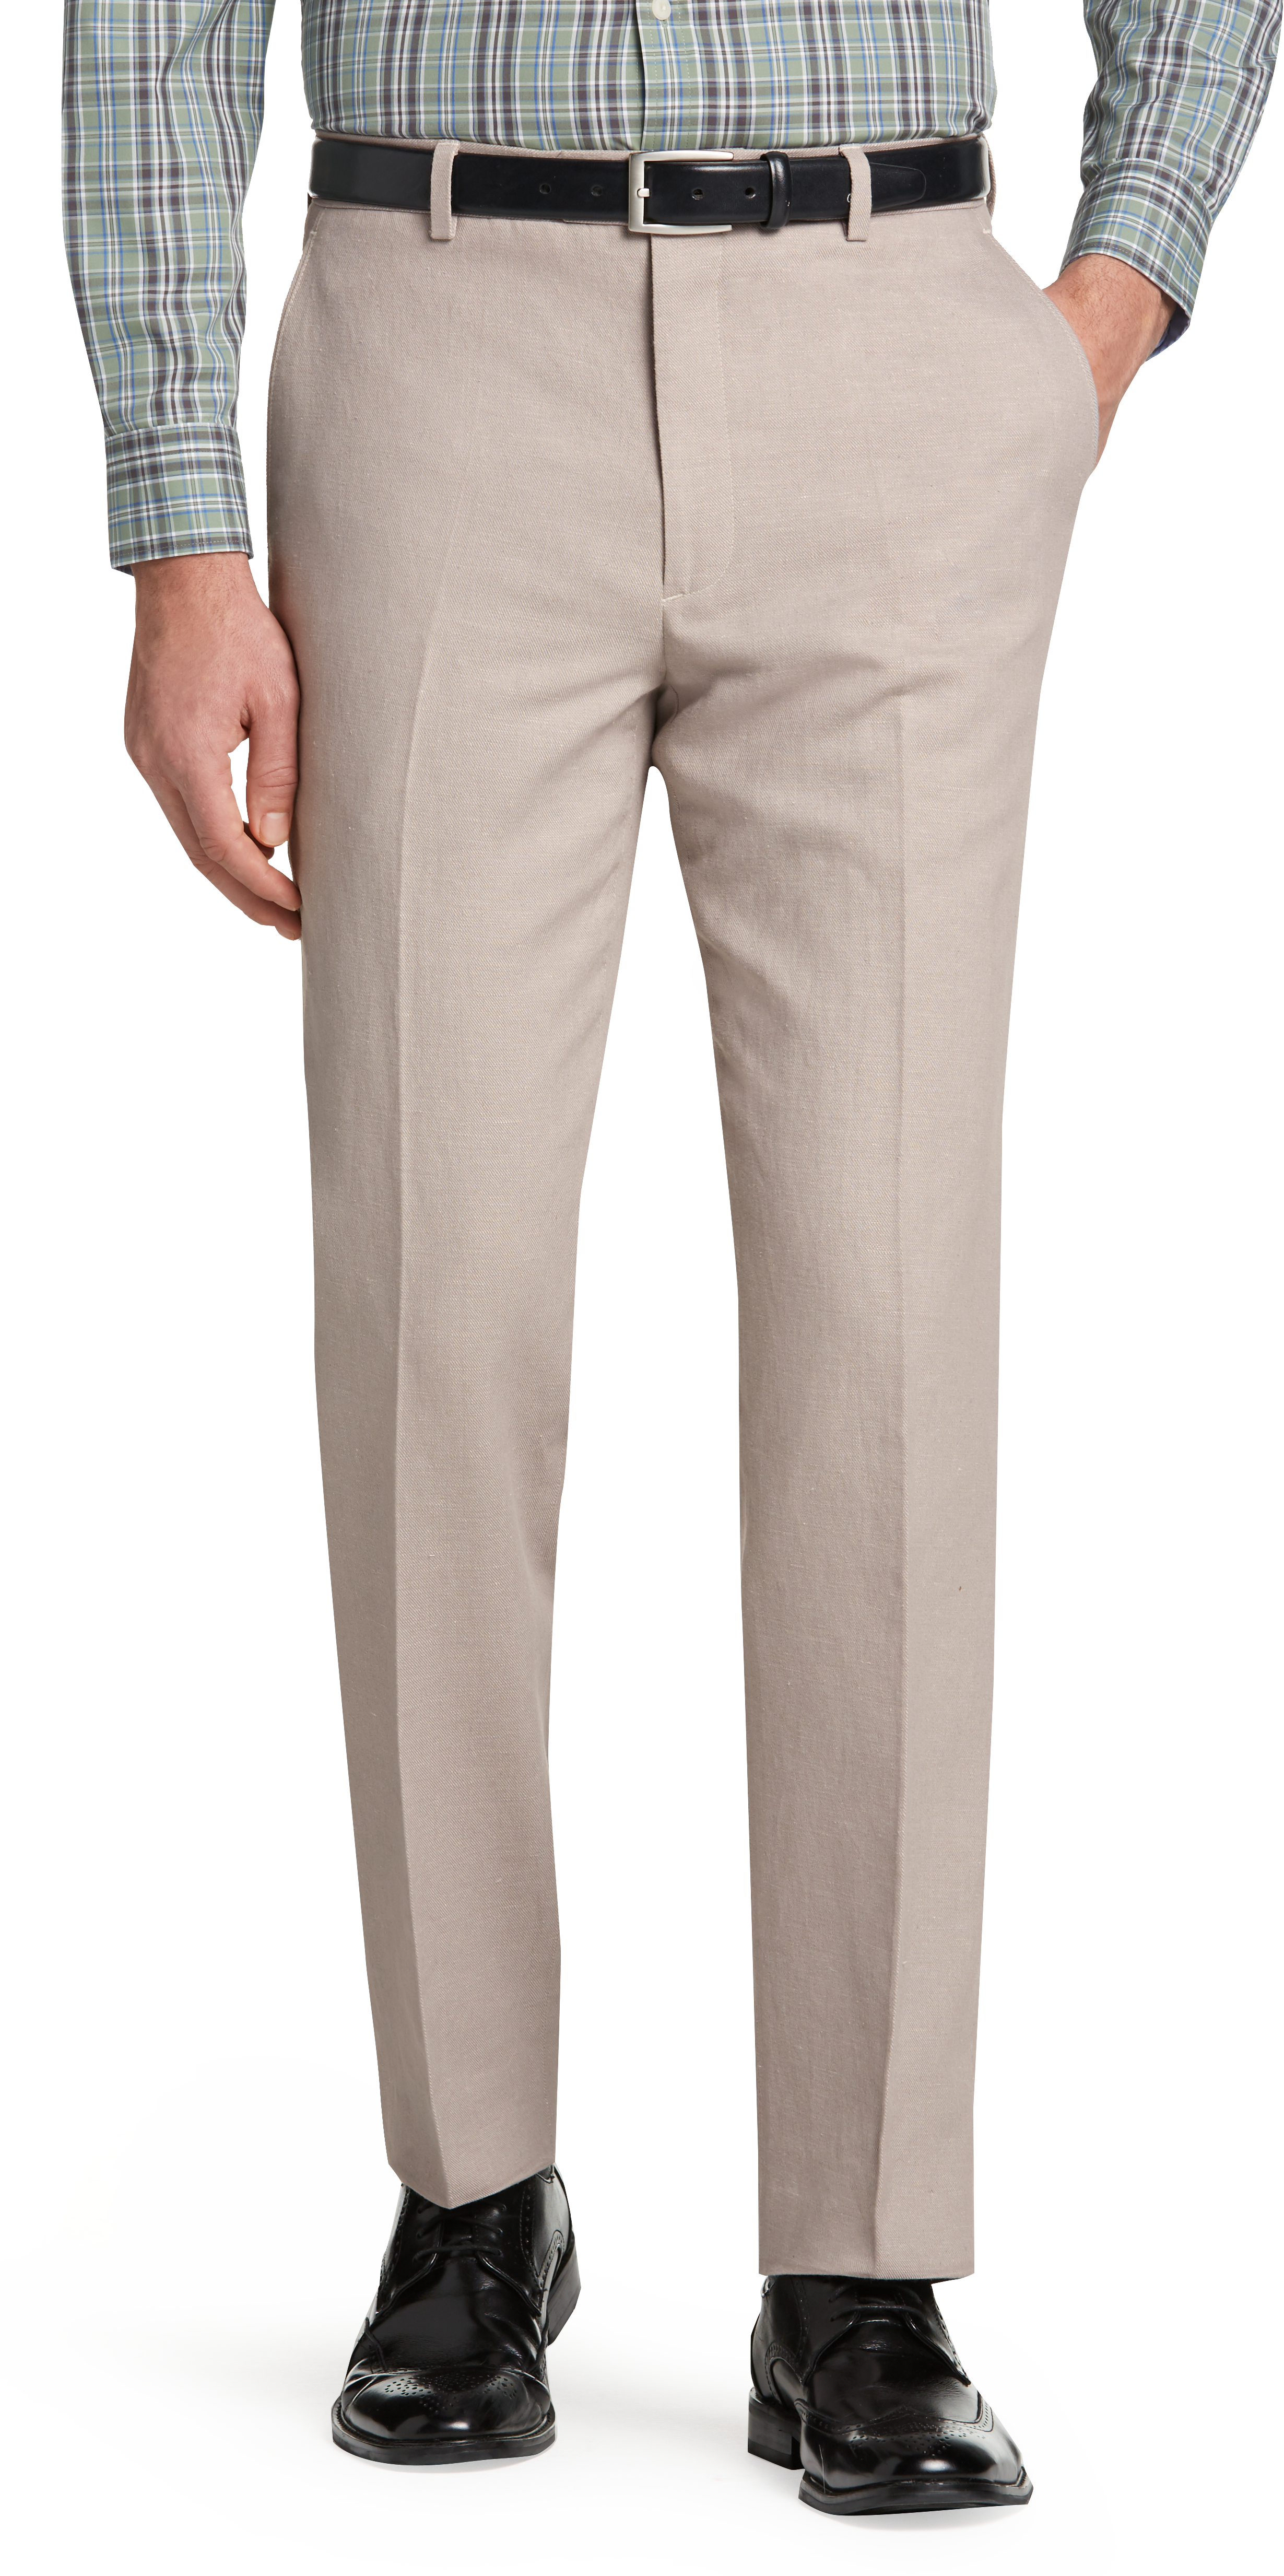 1905 Collection Tailored Fit Flat Front Dress Pant - Big & Tall ...